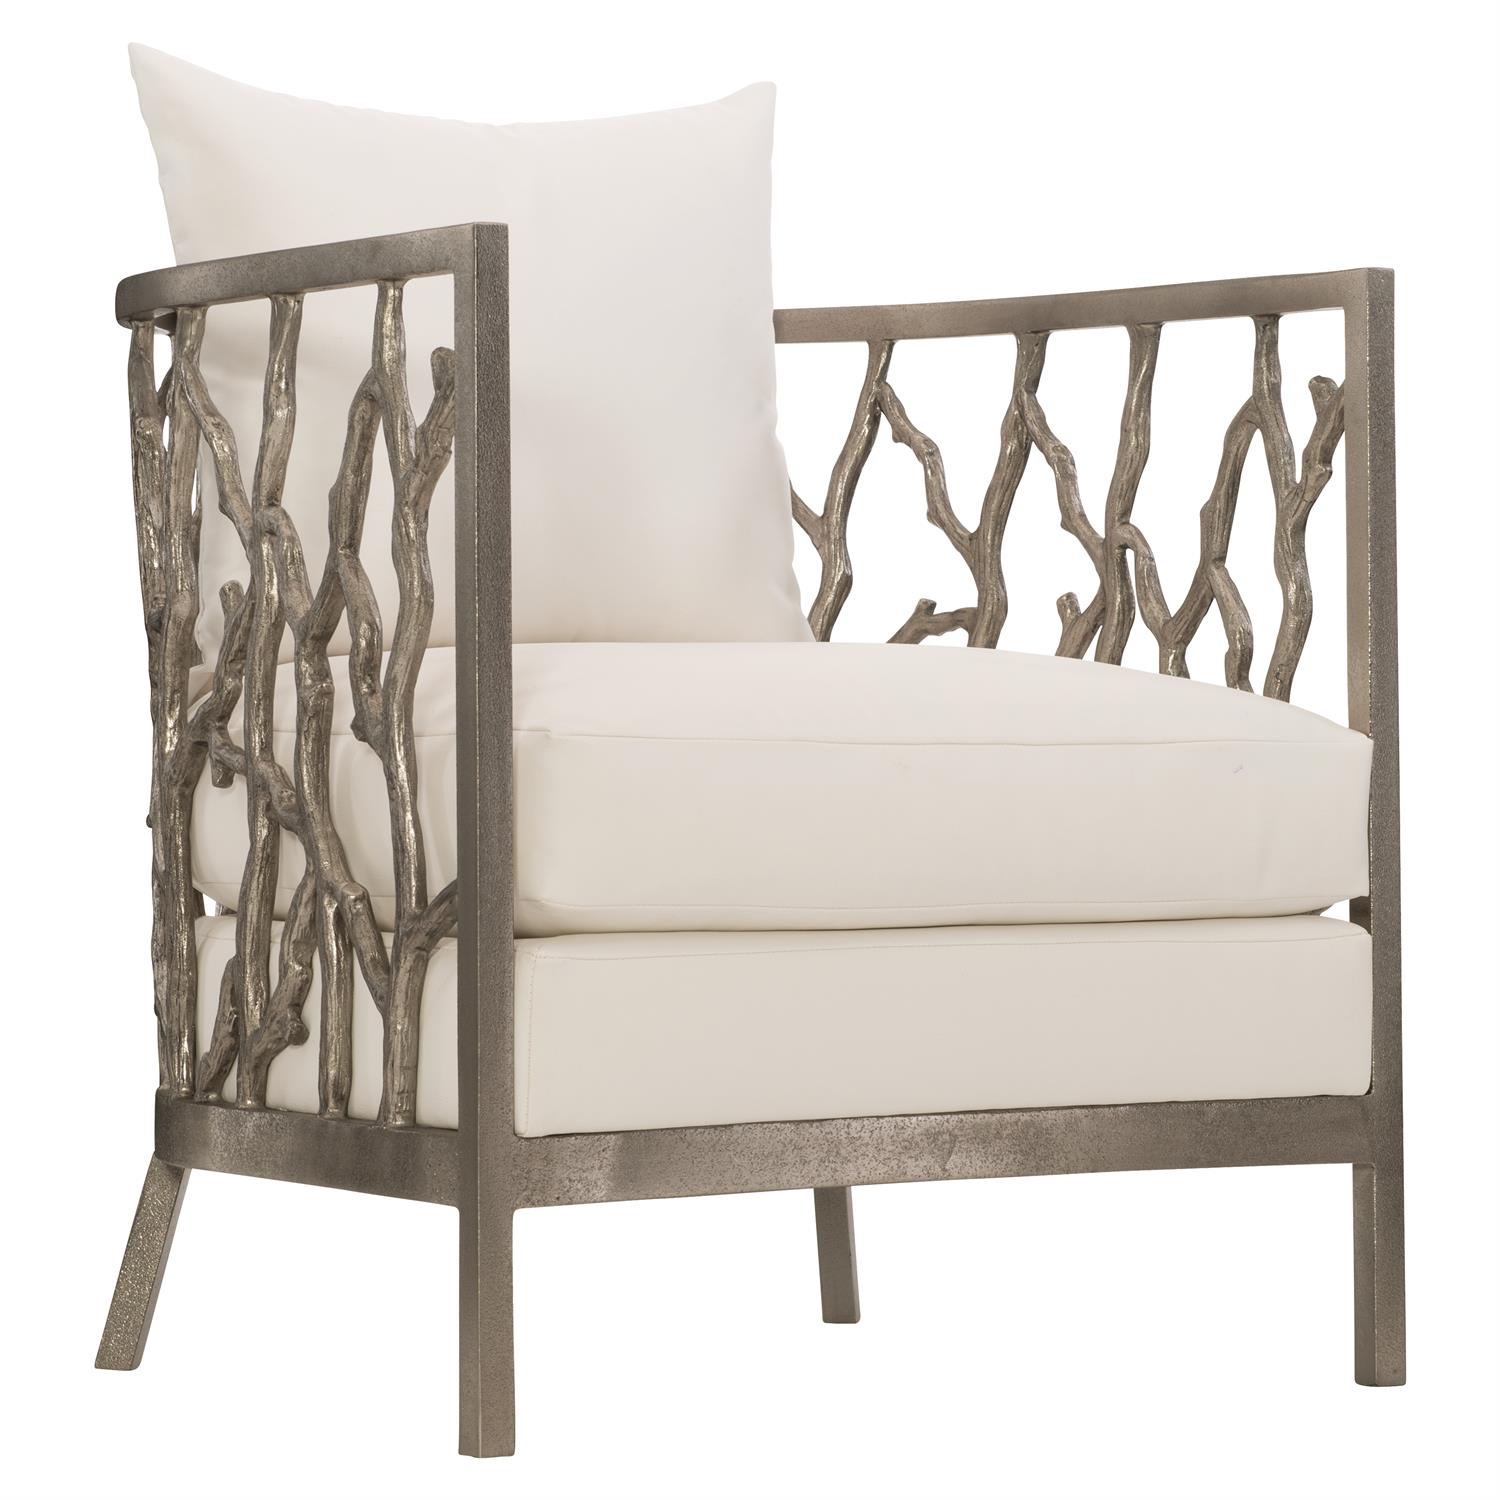 naples chair product image